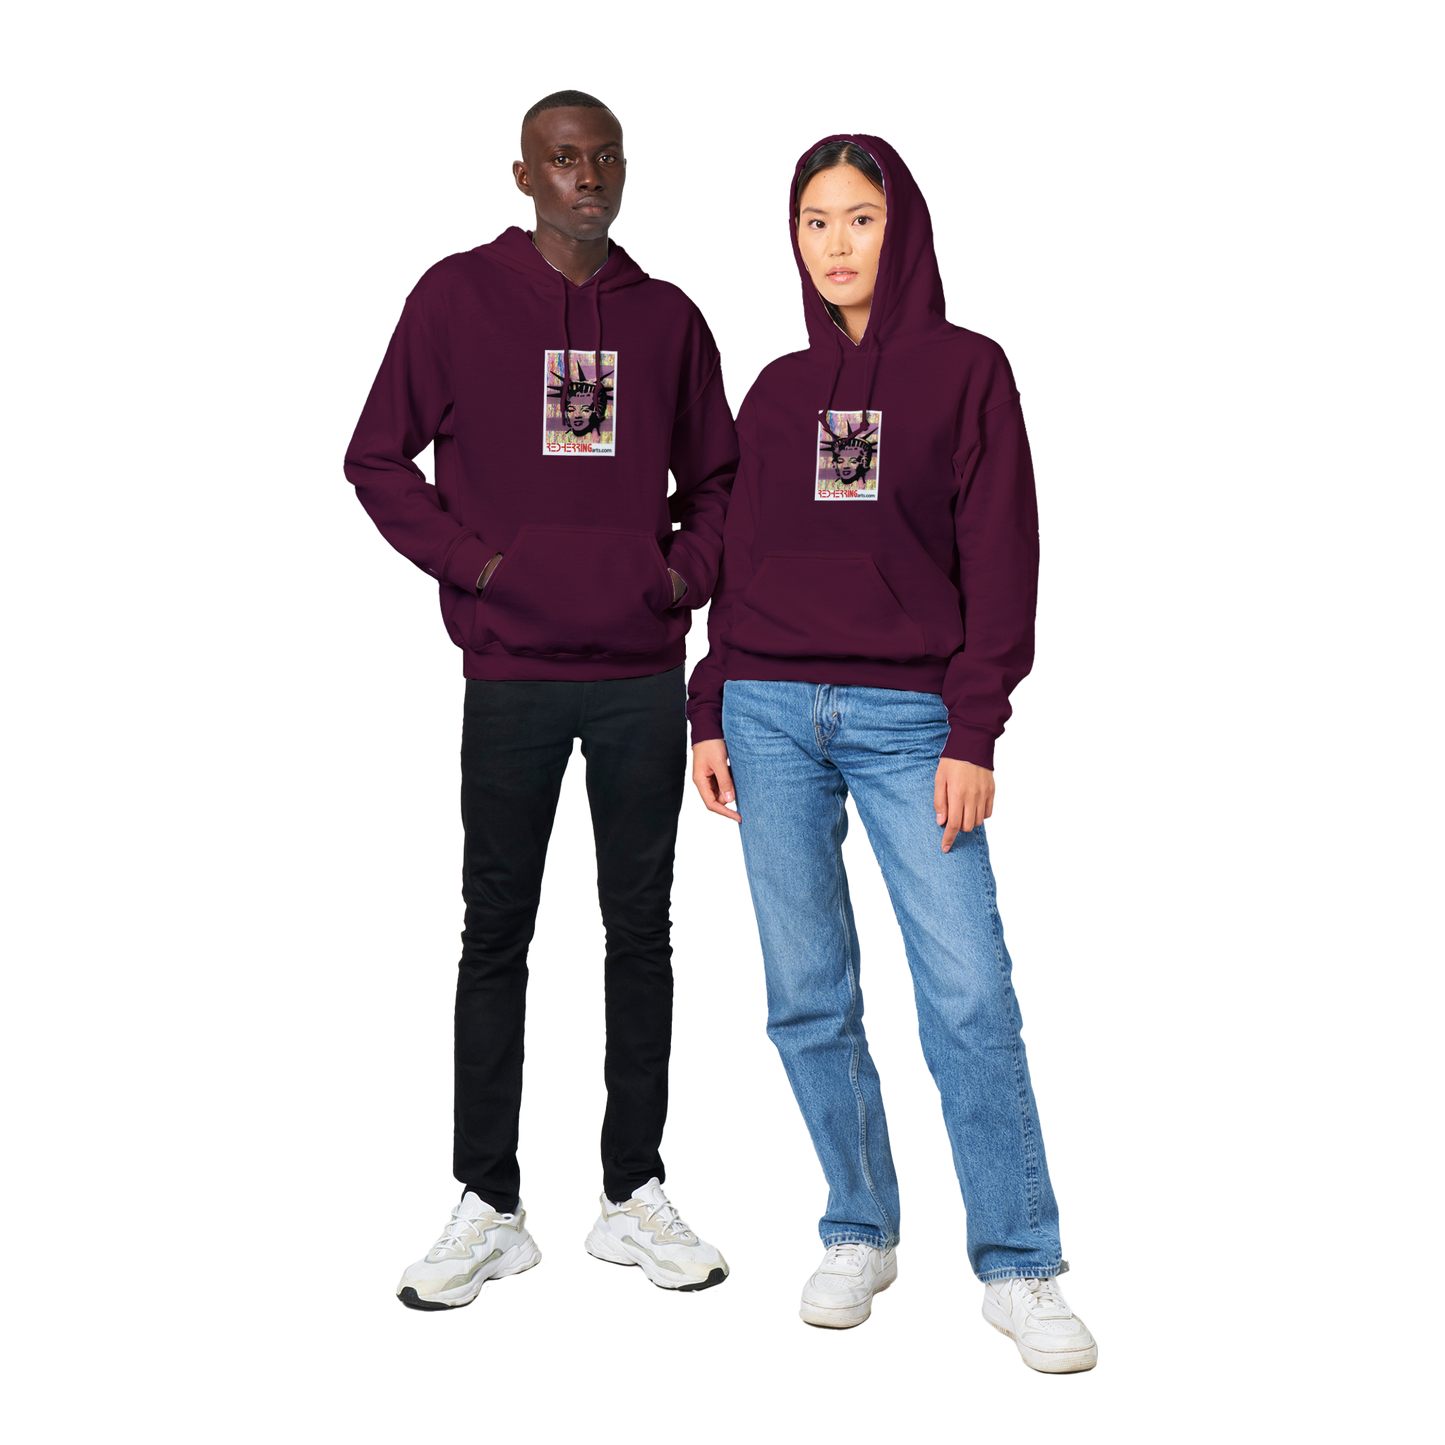 'Marilyberty #2' by RedHerring - Classic Unisex Pullover Hoodie (available in 8 colours)